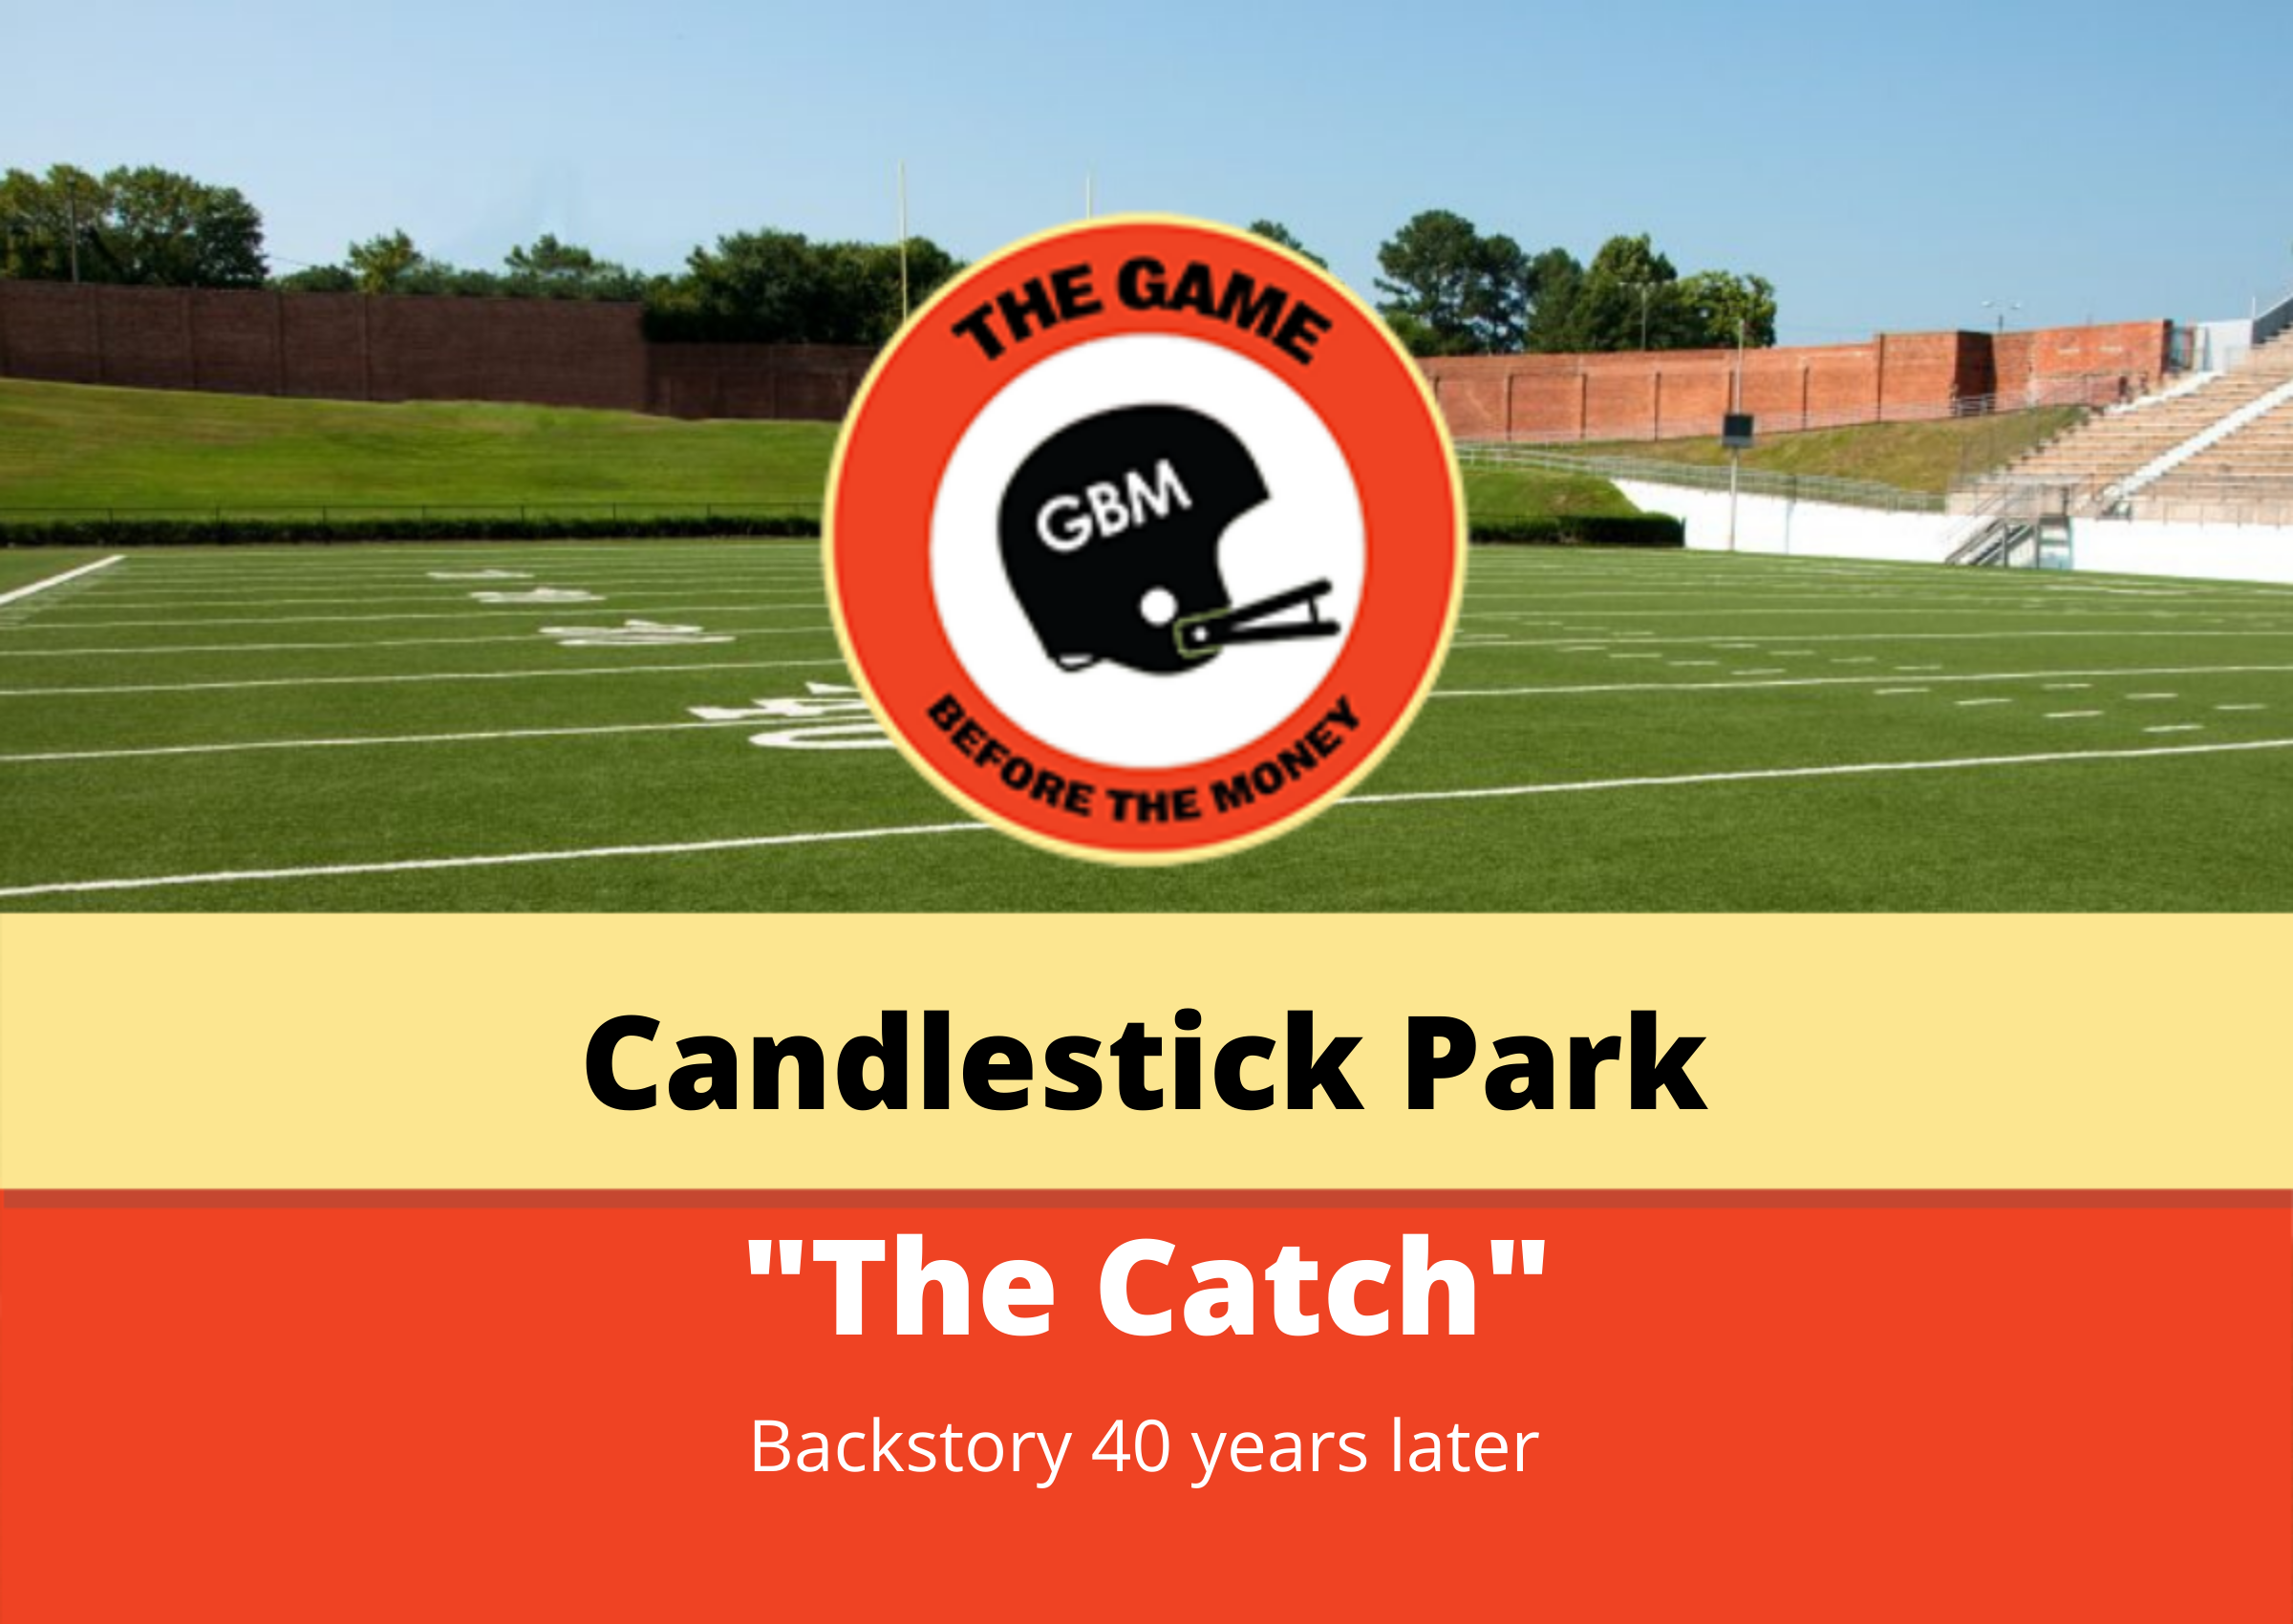 Candlestick Park and “The Catch” 40 Years Later